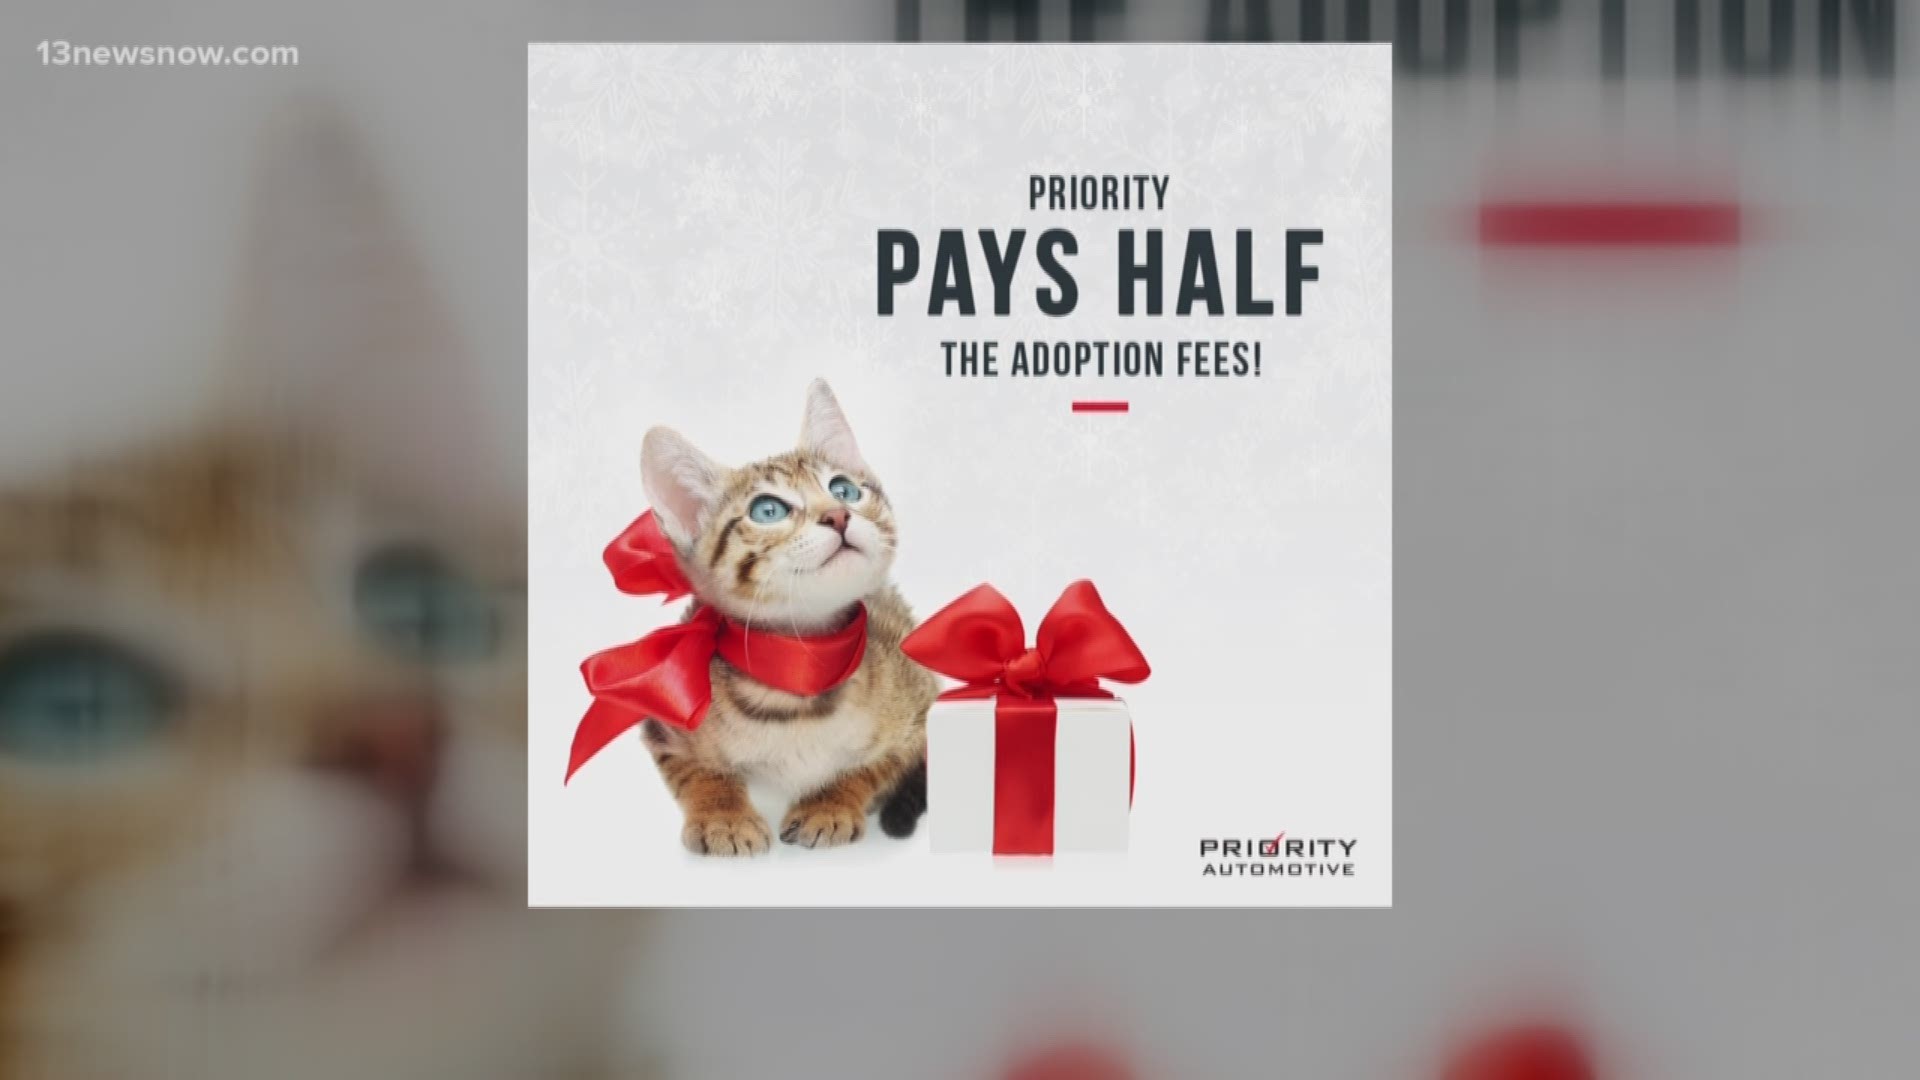 Kate Baldwin tells us more about the Home for the Holidays program by Priority Automotive that helps cut adoption fees for people who want to adopt pets.